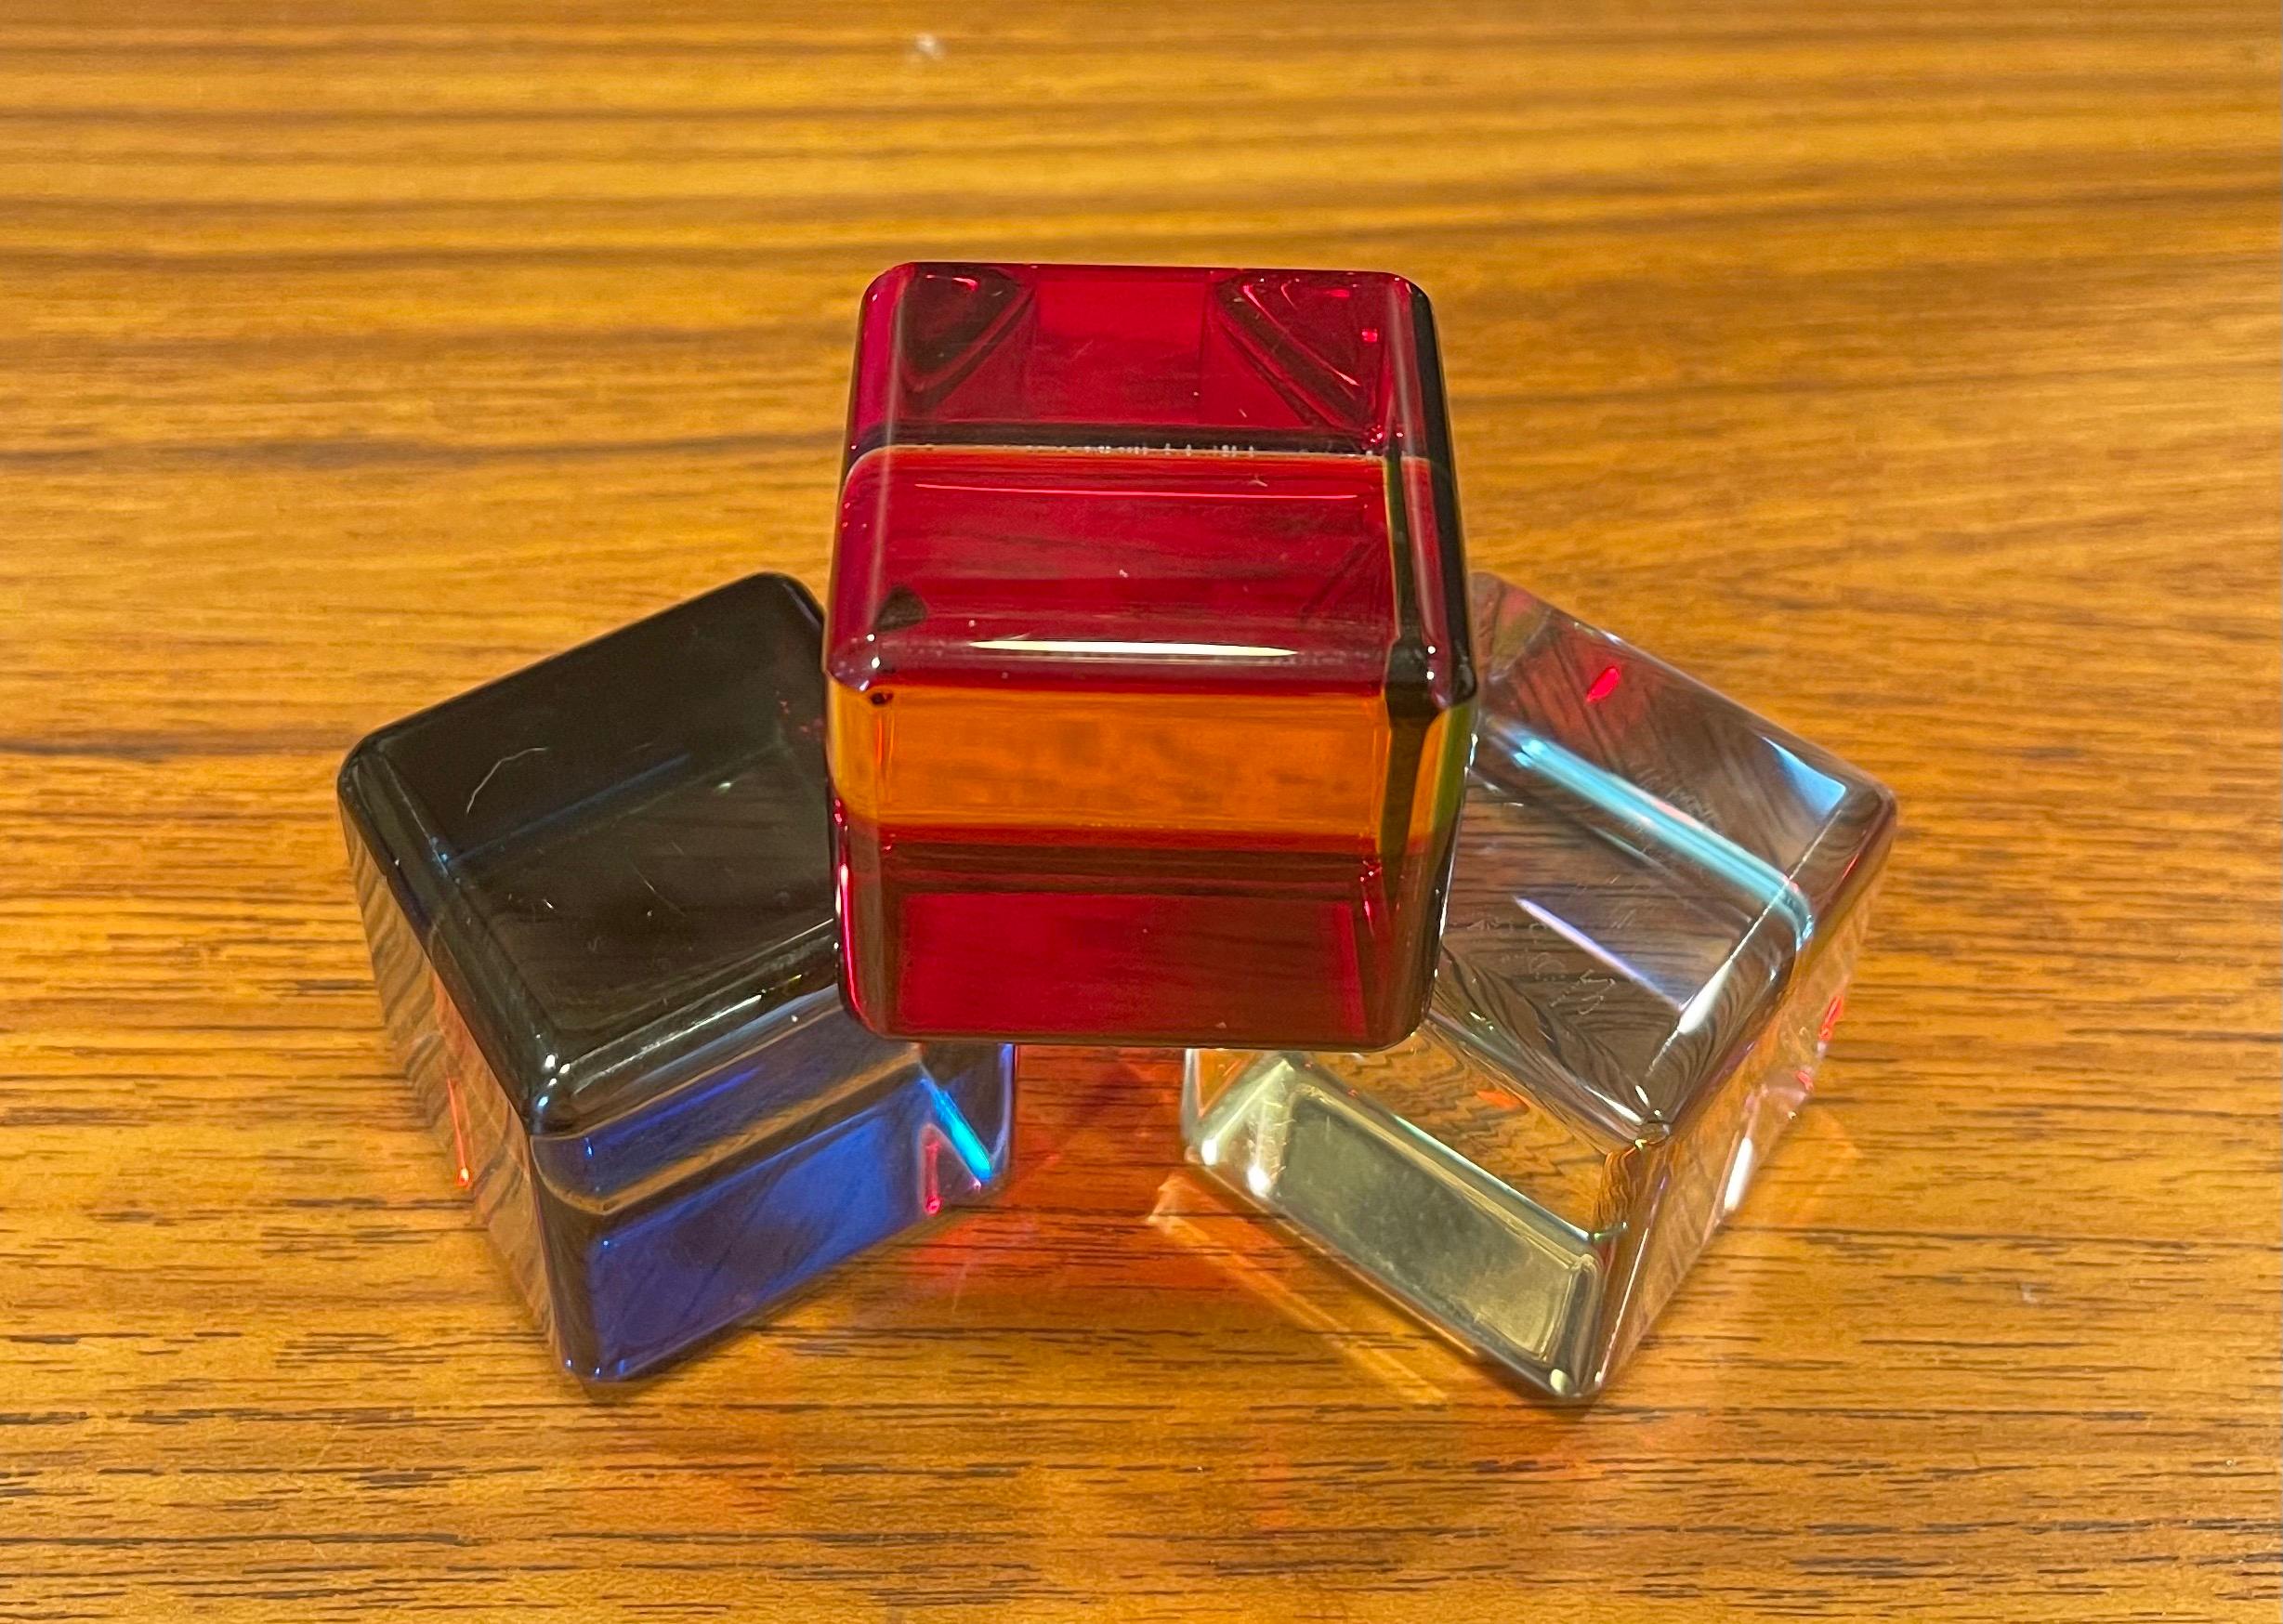 Set of Three Op Art Acrylic Cube Sculptures with Box by Vasa Mihich 1